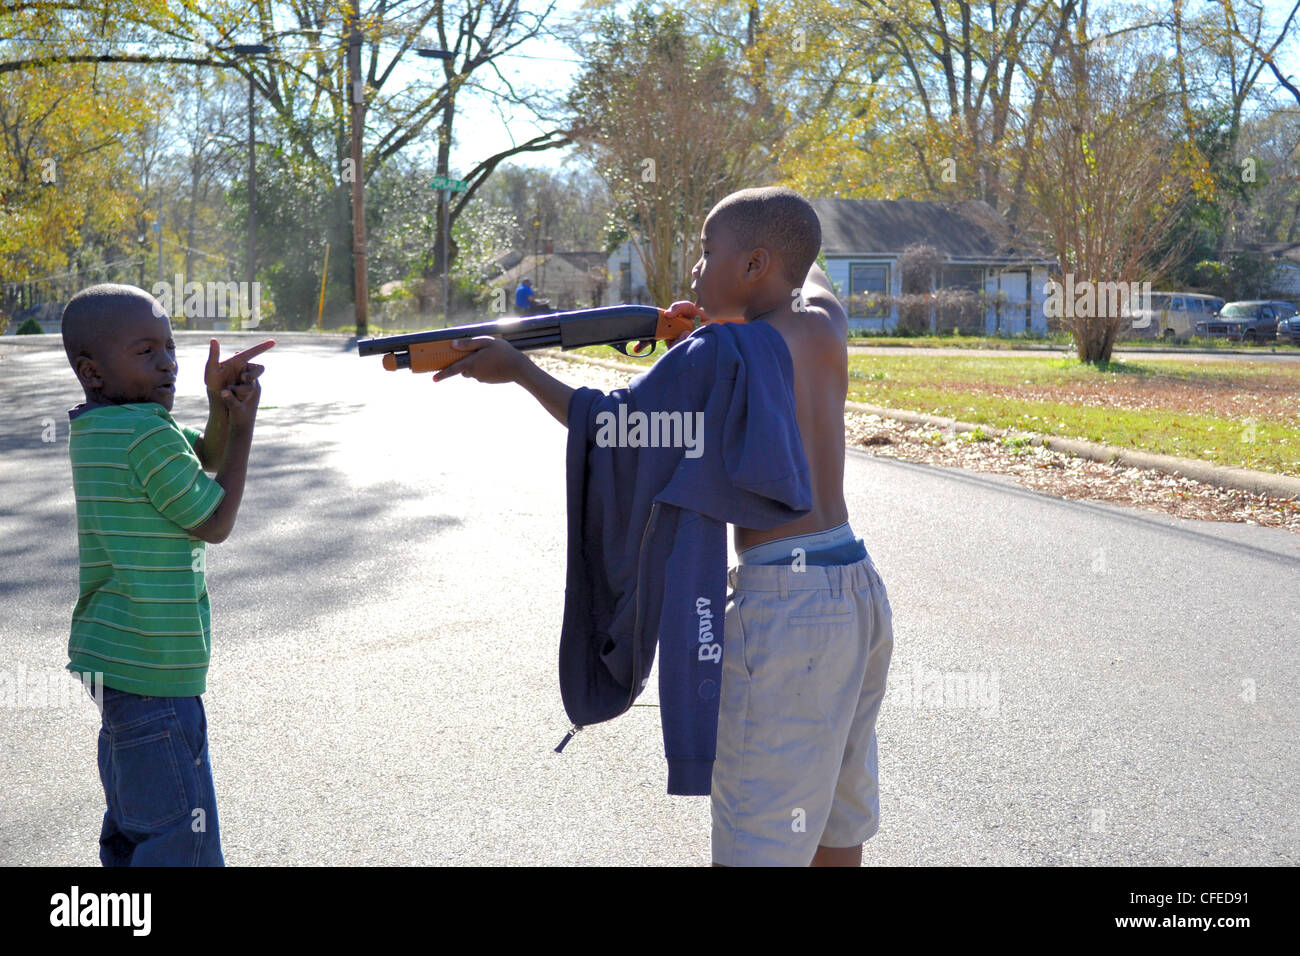 Teenager points a toy rifle at a young friend. Rifle was a Christmas present. American south. Stock Photo